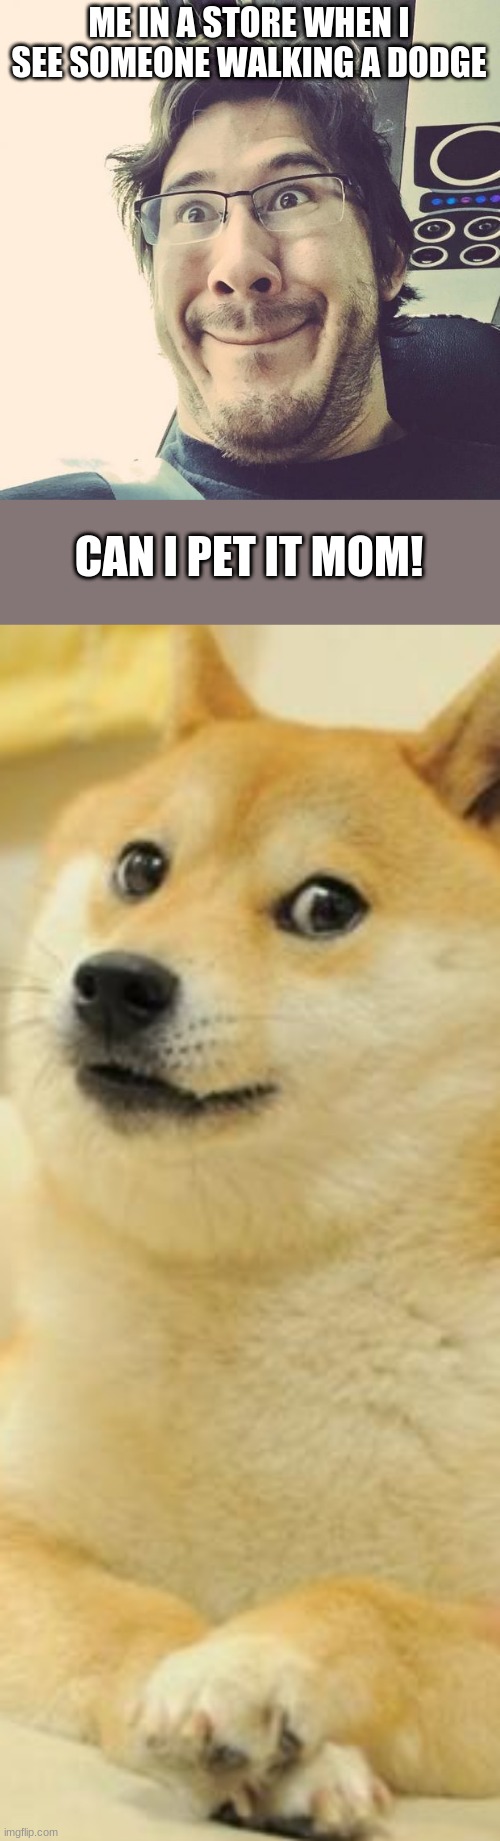 ME IN A STORE WHEN I SEE SOMEONE WALKING A DODGE; CAN I PET IT MOM! | image tagged in memes,doge 2,markiplier derp face | made w/ Imgflip meme maker